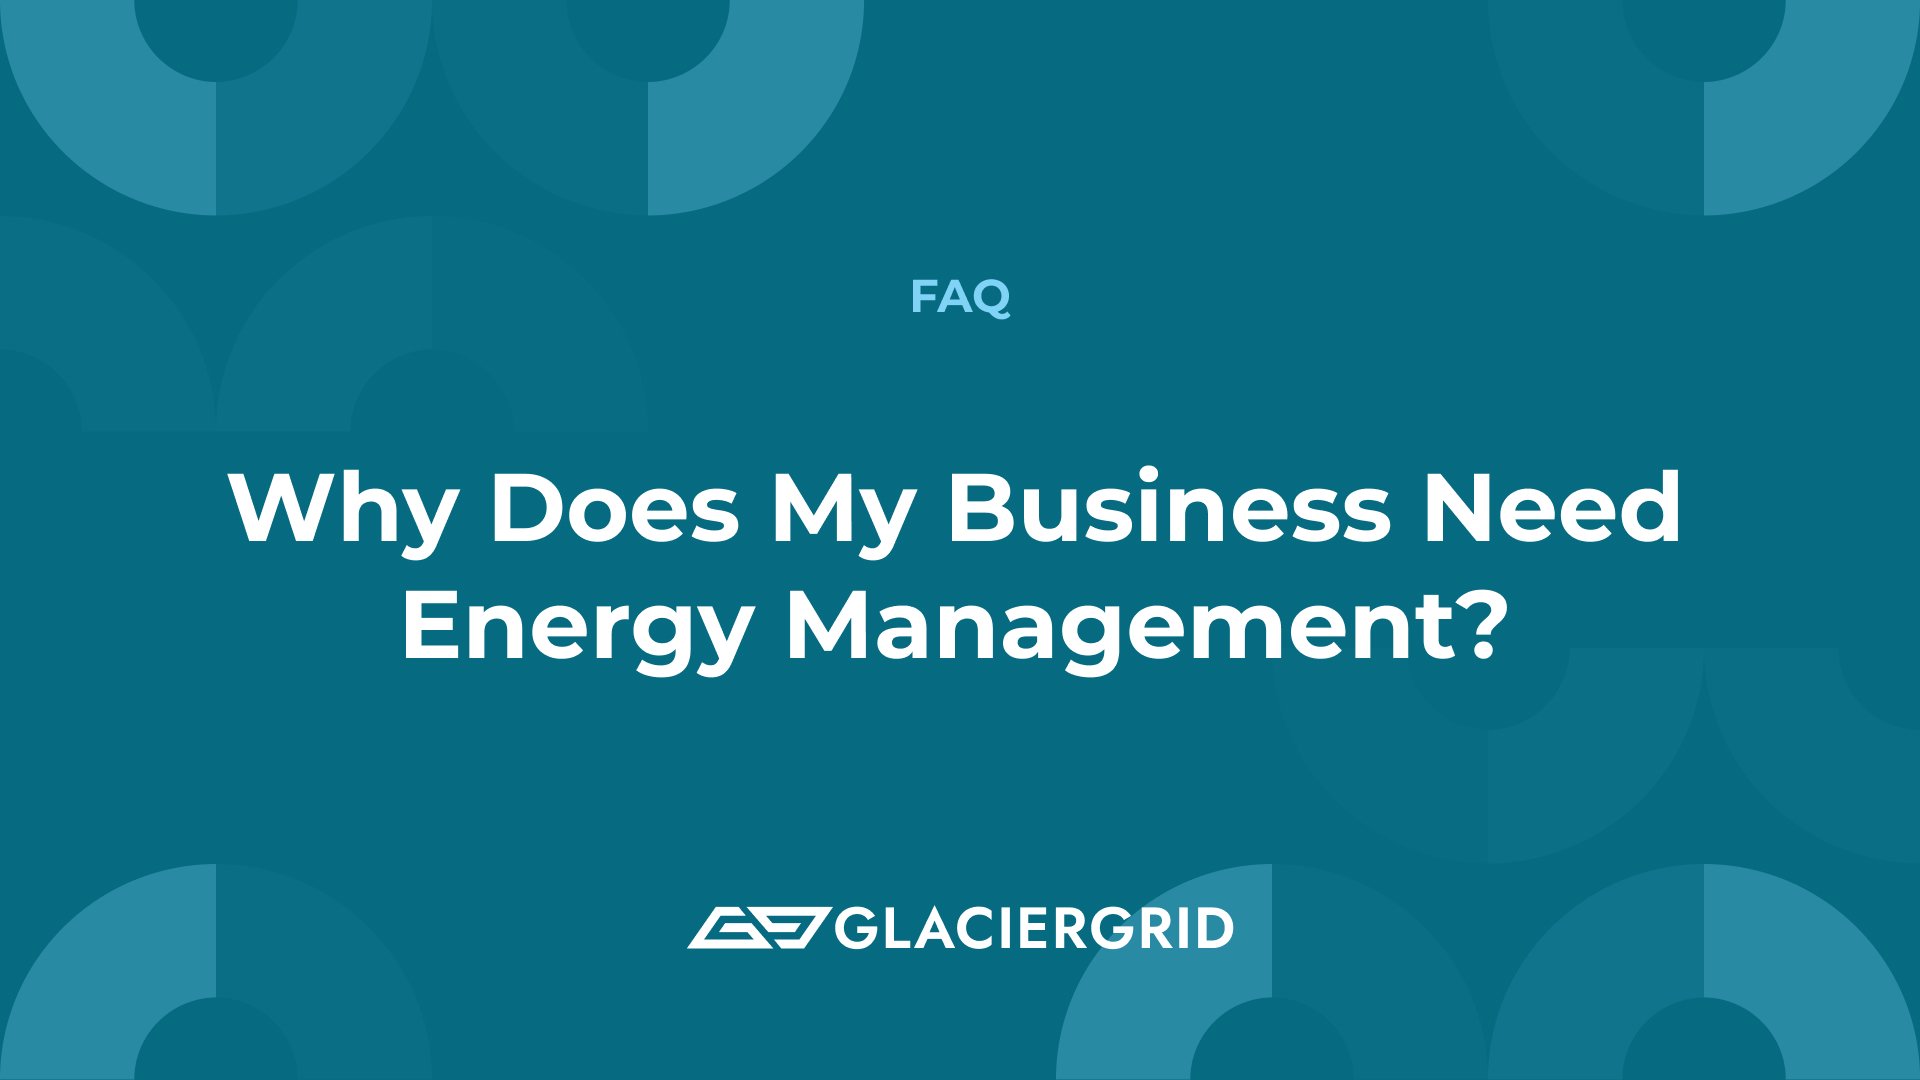 Why does my business need energy Management